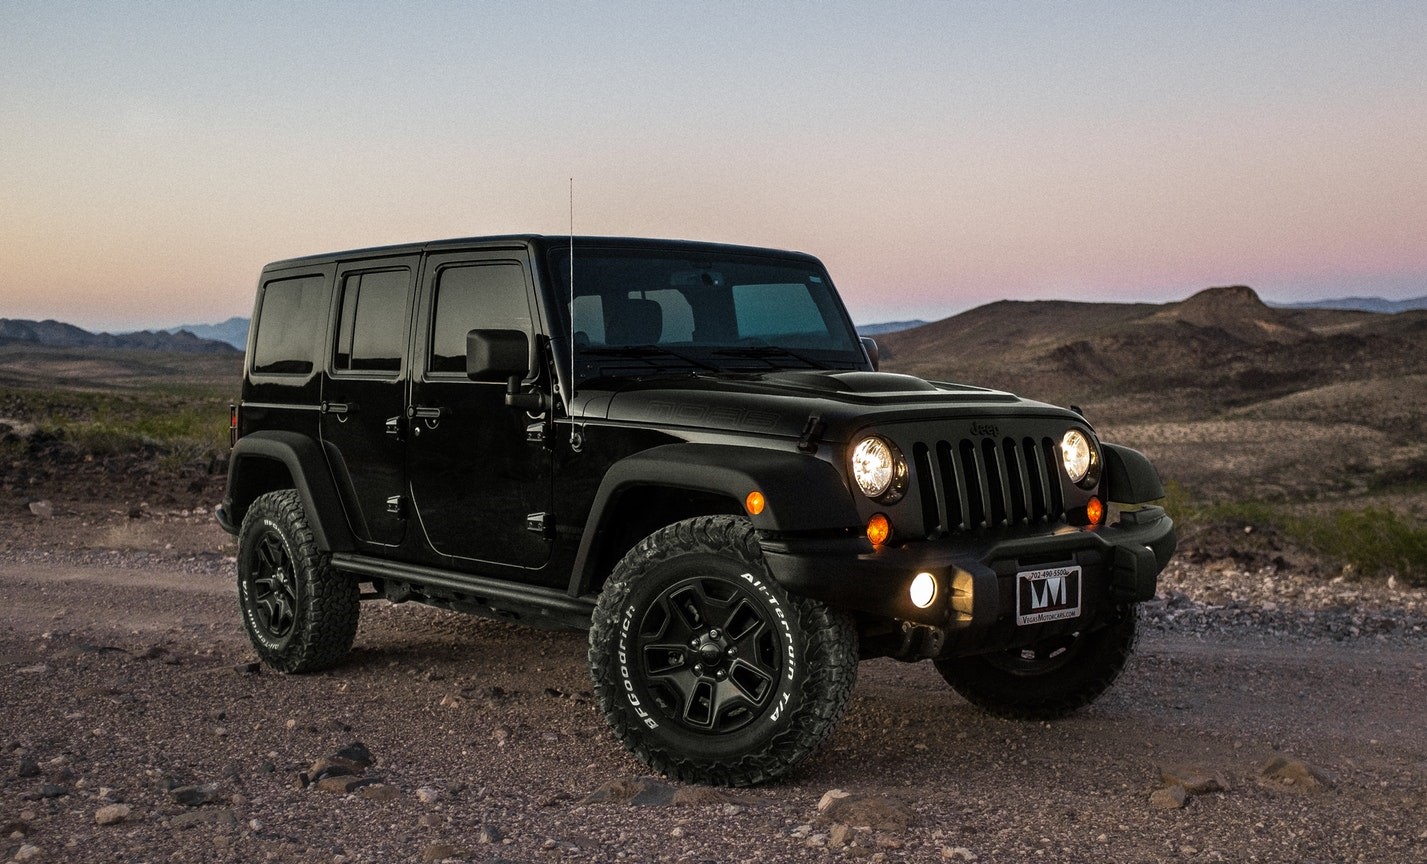 Seven Real Reasons Why You Should Buy a Jeep SUVs